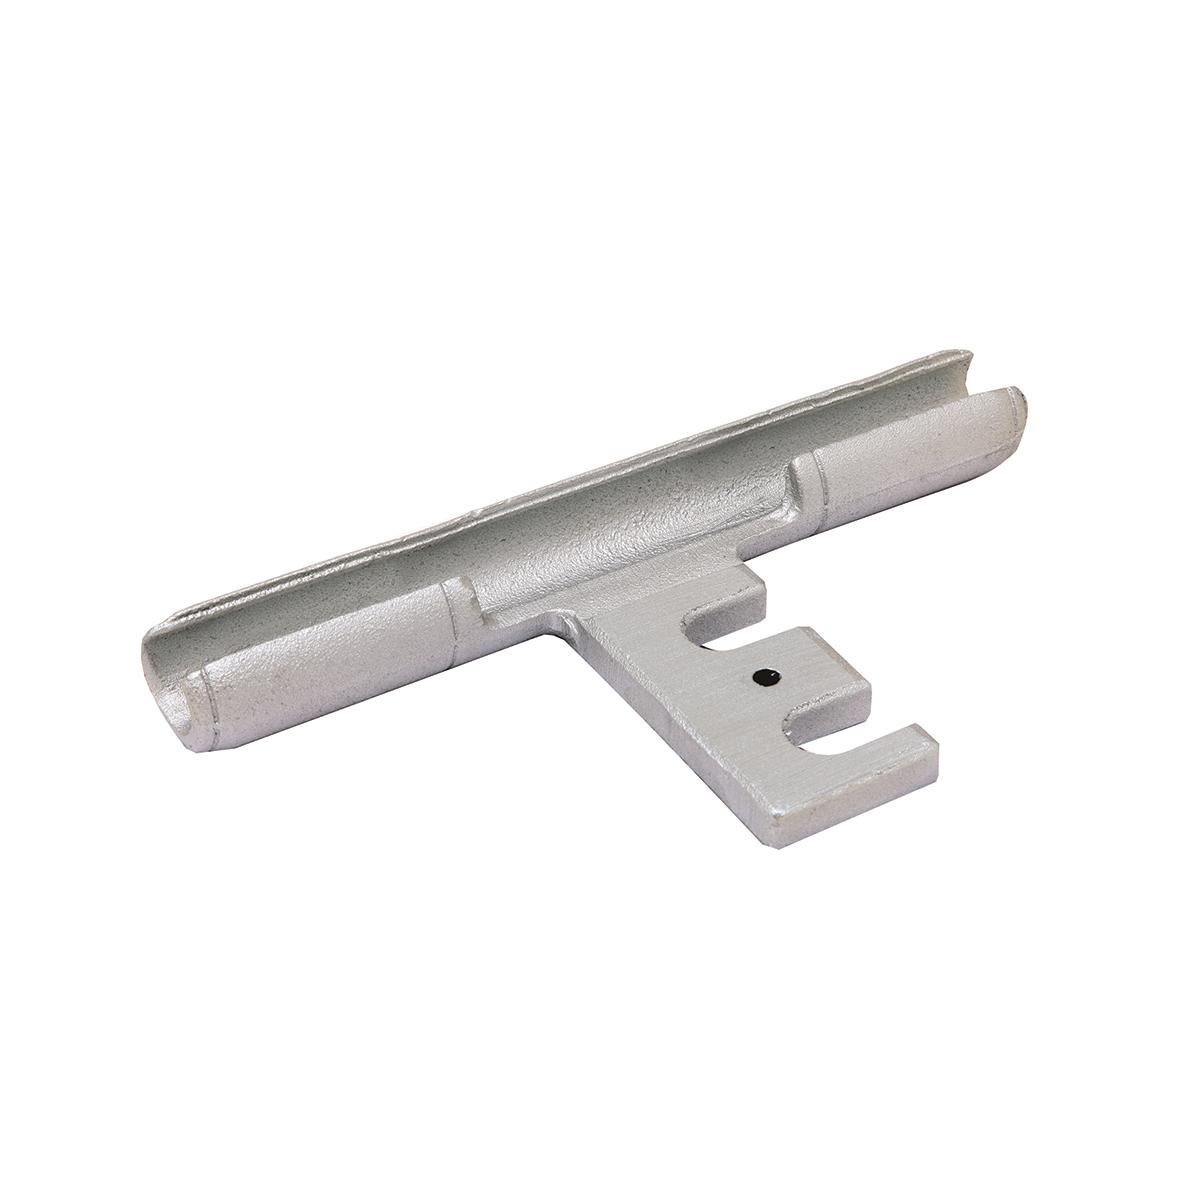 Hubbell YTA33R2N AL primary T-tap connector with slotted tap pad designed for easy disconnecting of tap conductor, For use with Types YKA-R-2N and YKA-A-2N, barrel Length: 2.62 IN L  ; Features: Aluminum Primary T-Tap Connector With Slotted Tap Pad Designed For Easy Disco